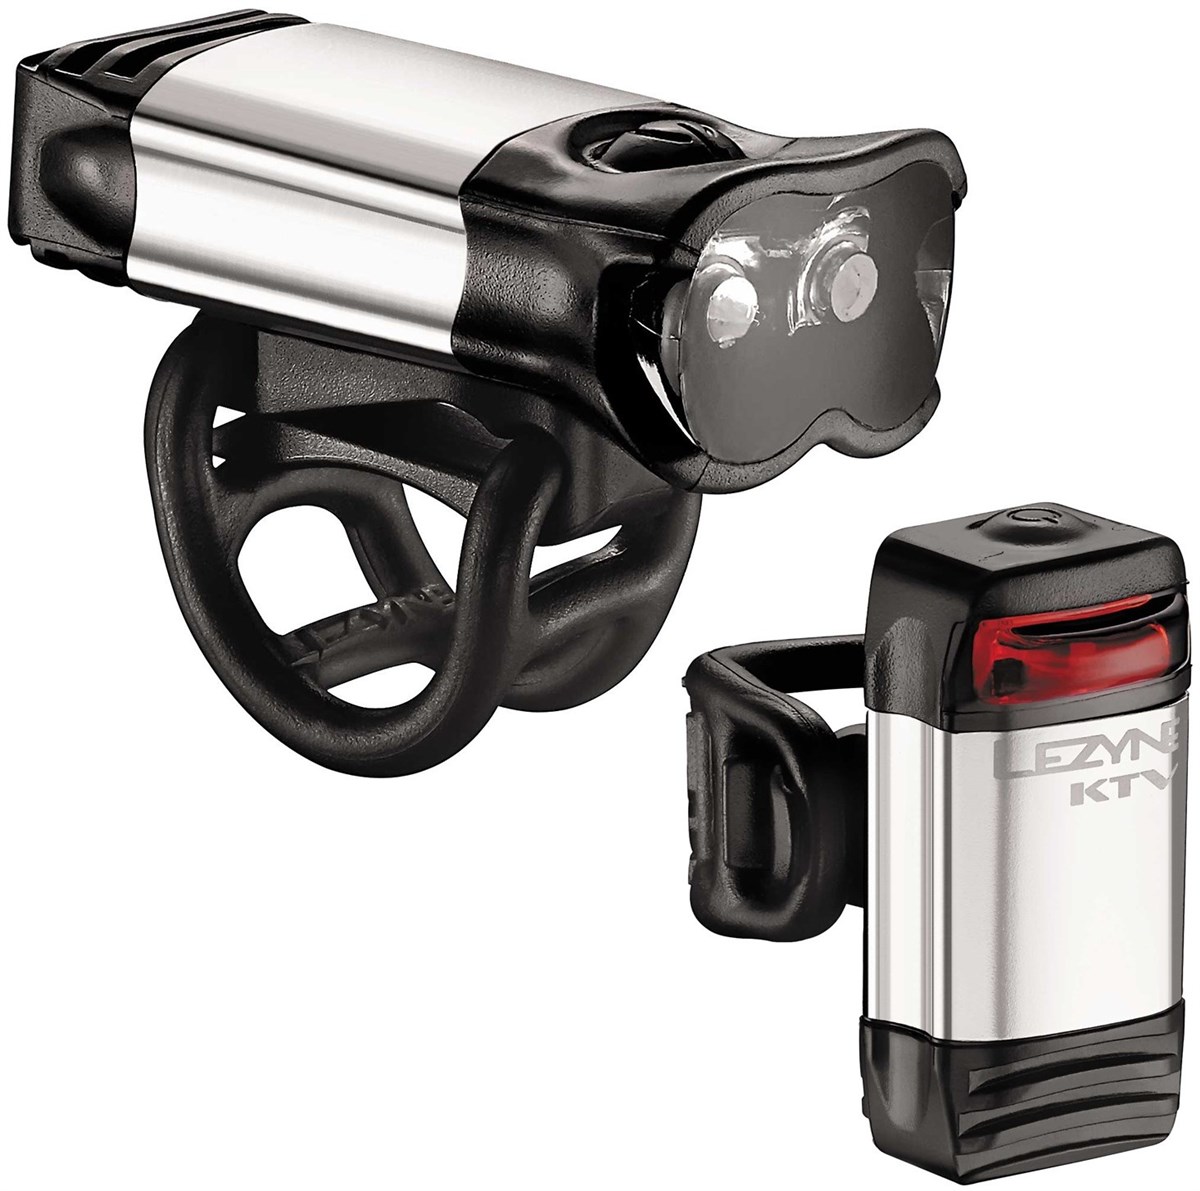 Lezyne KTV Drive Pro USB Front/Rear Rechargeable Lightset product image